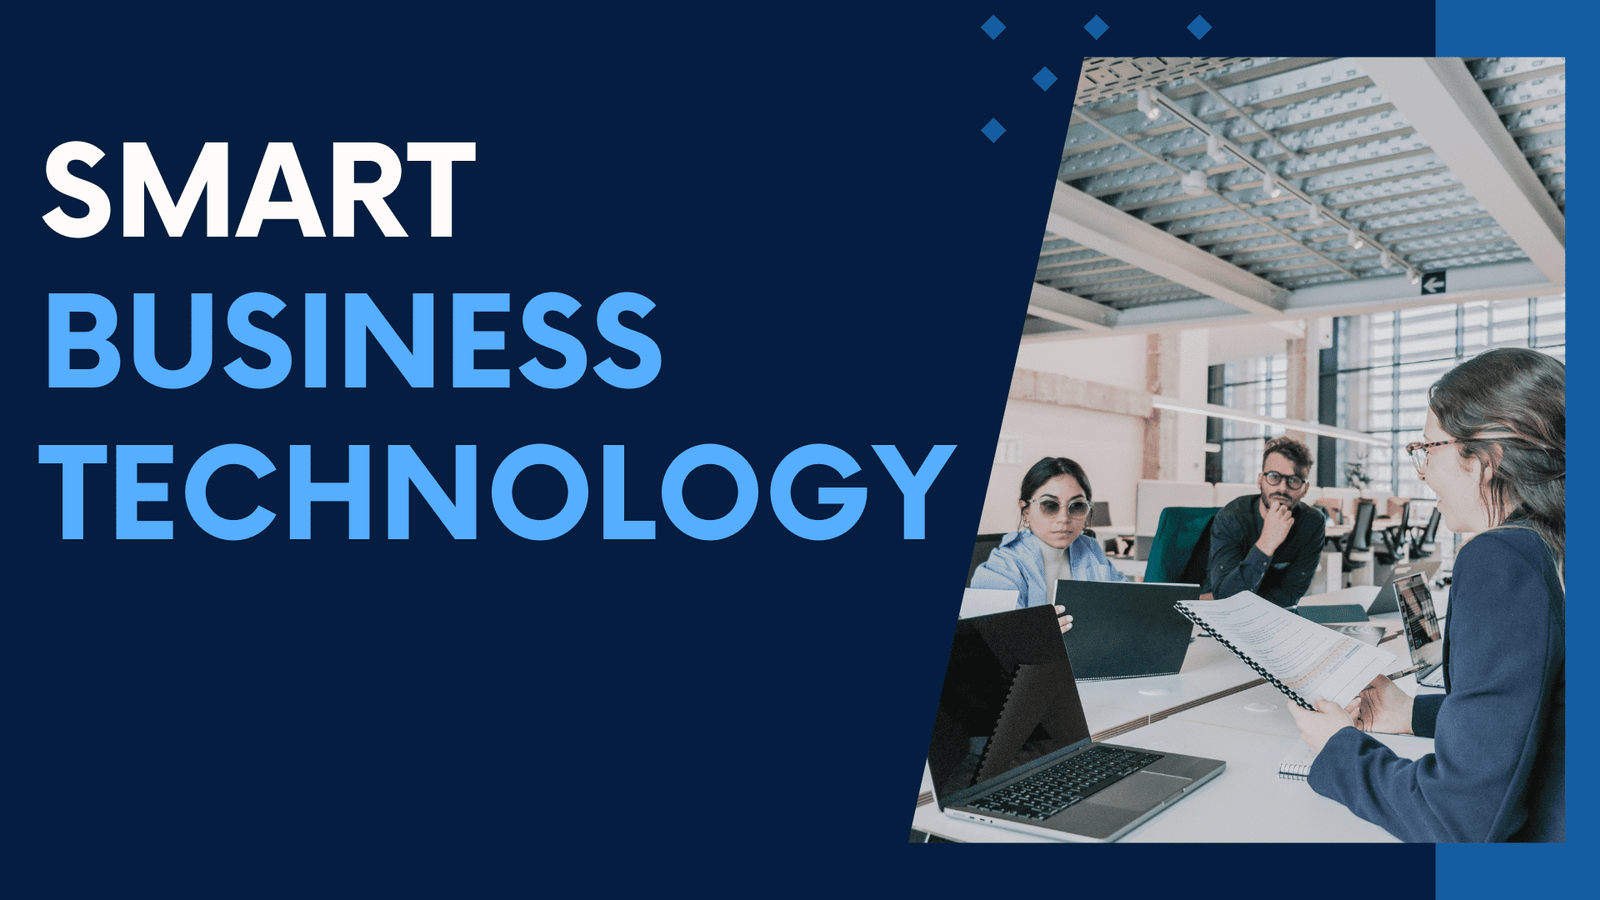 Small Business Technology refers to the new small business or brand that adopts technology for its development and career.